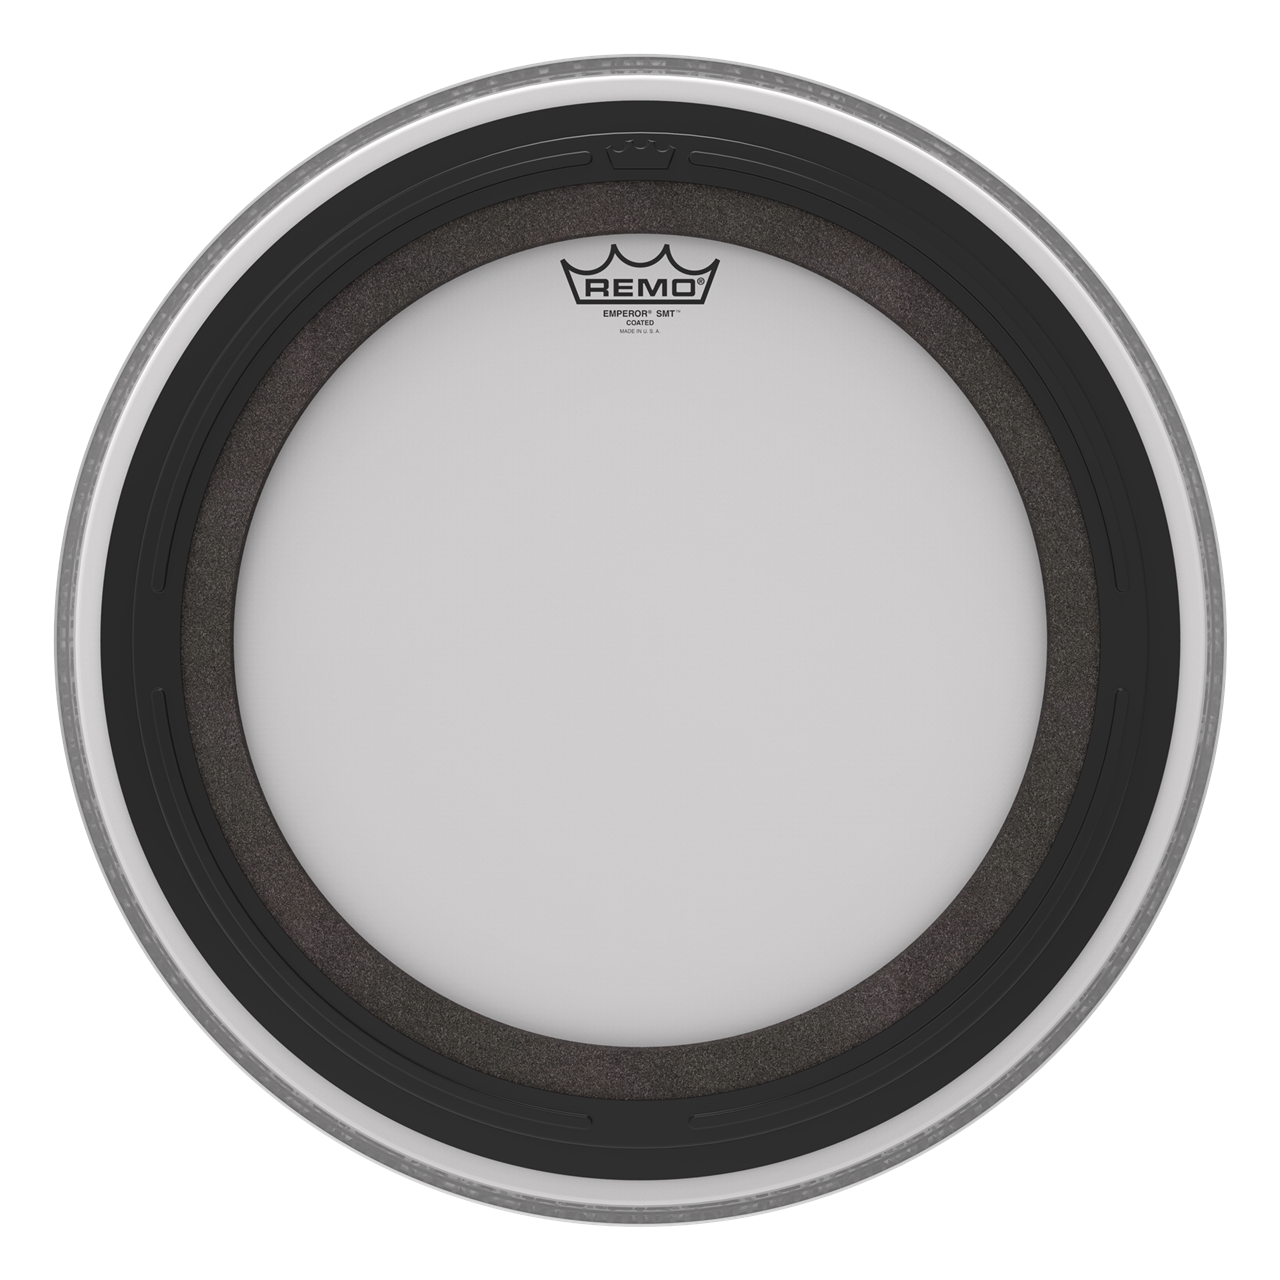 Remo BB-1118-00-SMT Emperor STM Coated, 18" Bass Drum Fell